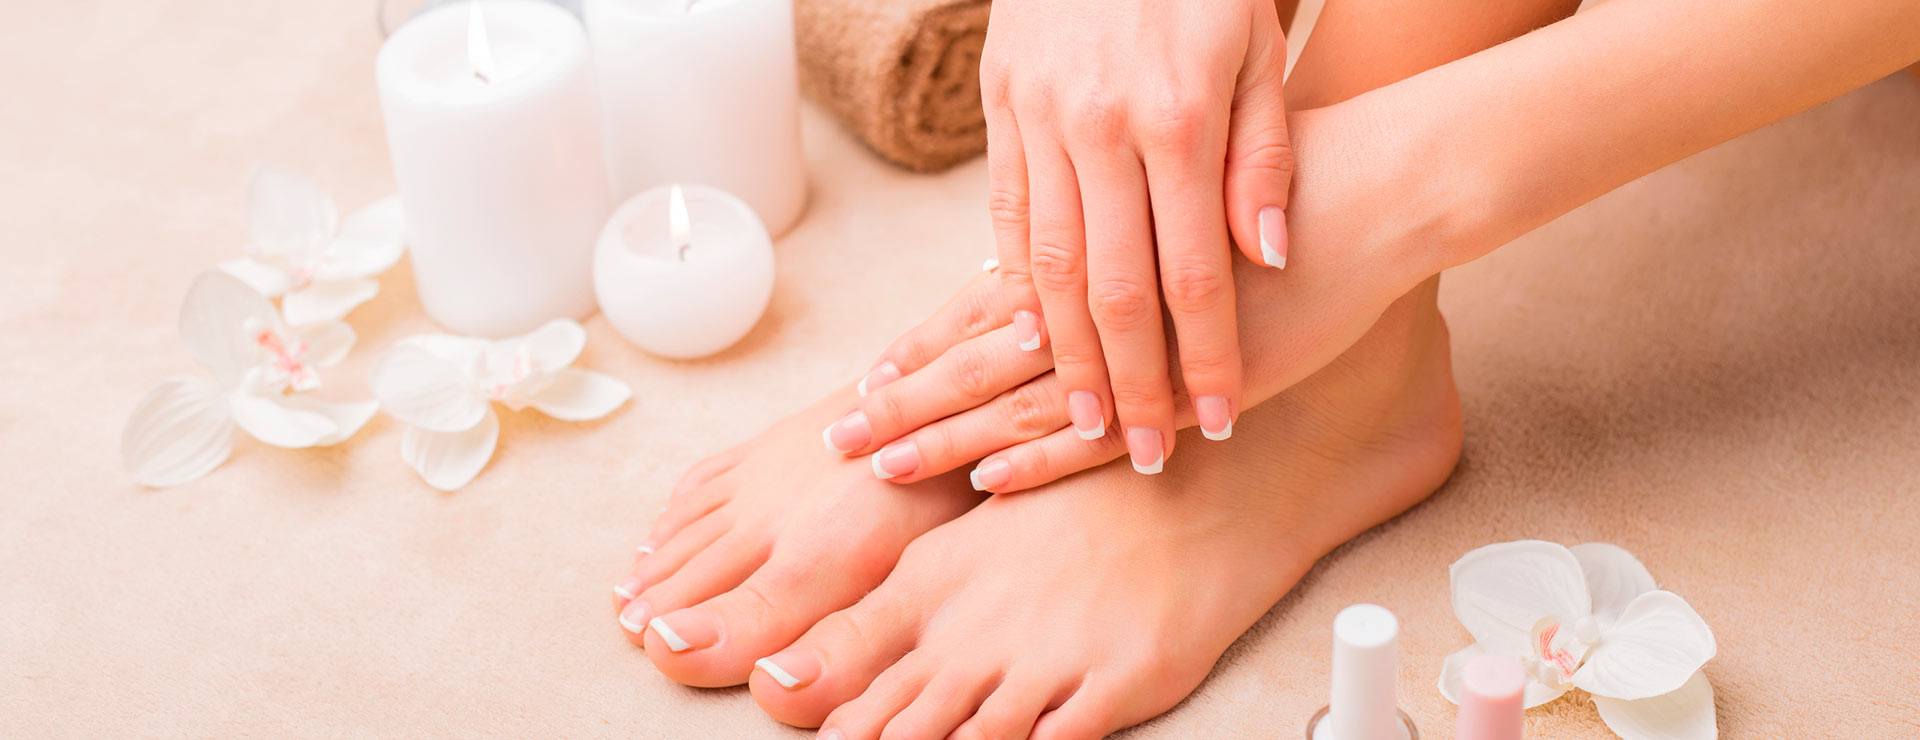 Deluxe Manicure and Pedicure